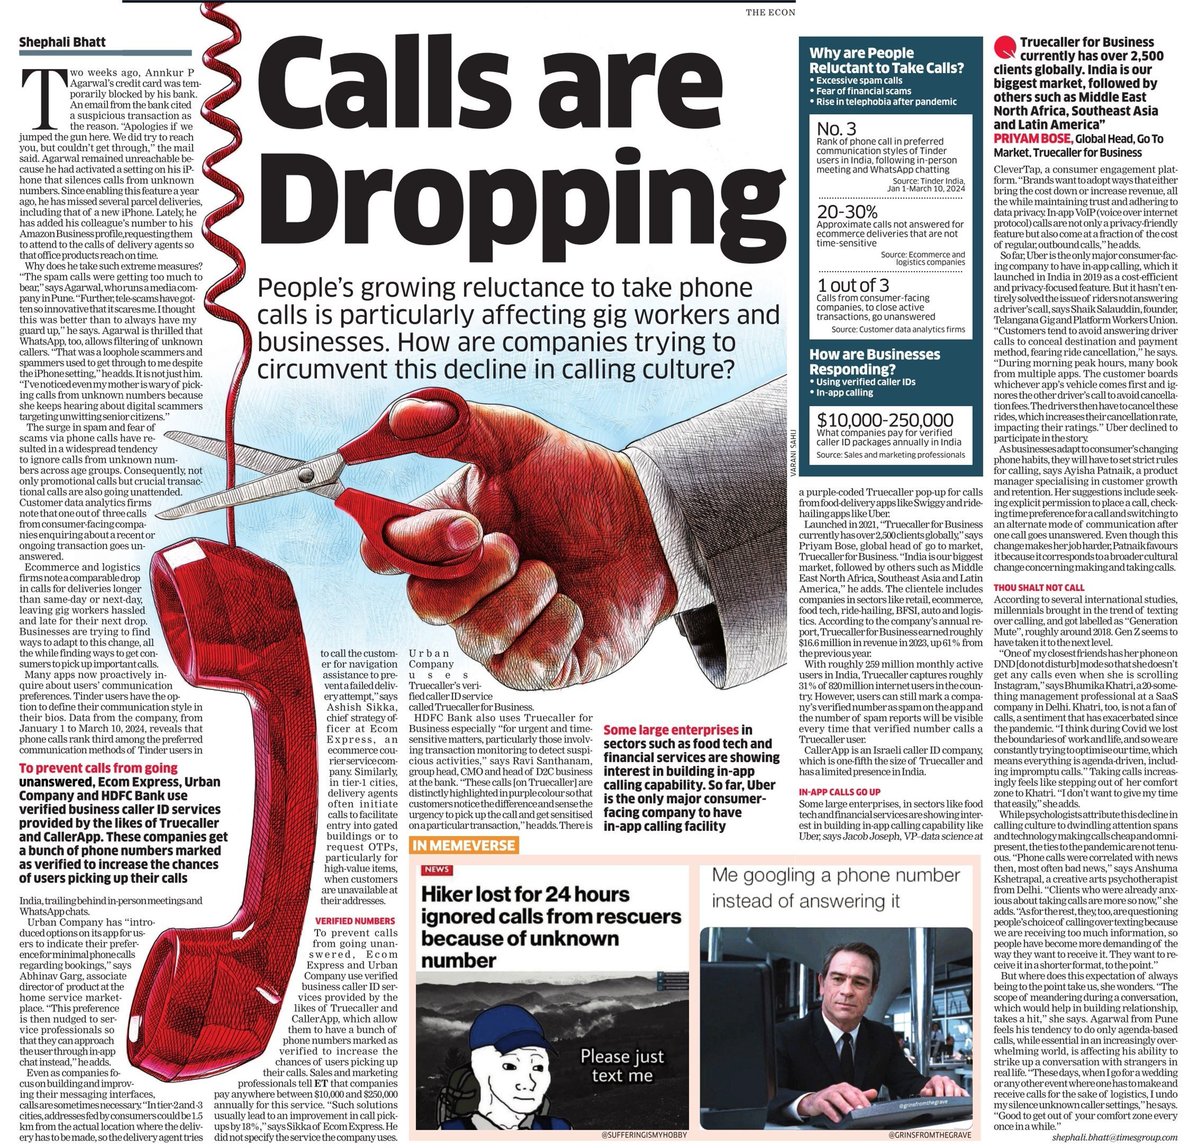 Ecommerce and logistics firms note a comparable drop in calls for deliveries longer than same-day or next-day, leaving gig workers hassled and late for their next drop. Businesses are trying to find ways to adapt to this change m.economictimes.com/industry/servi…